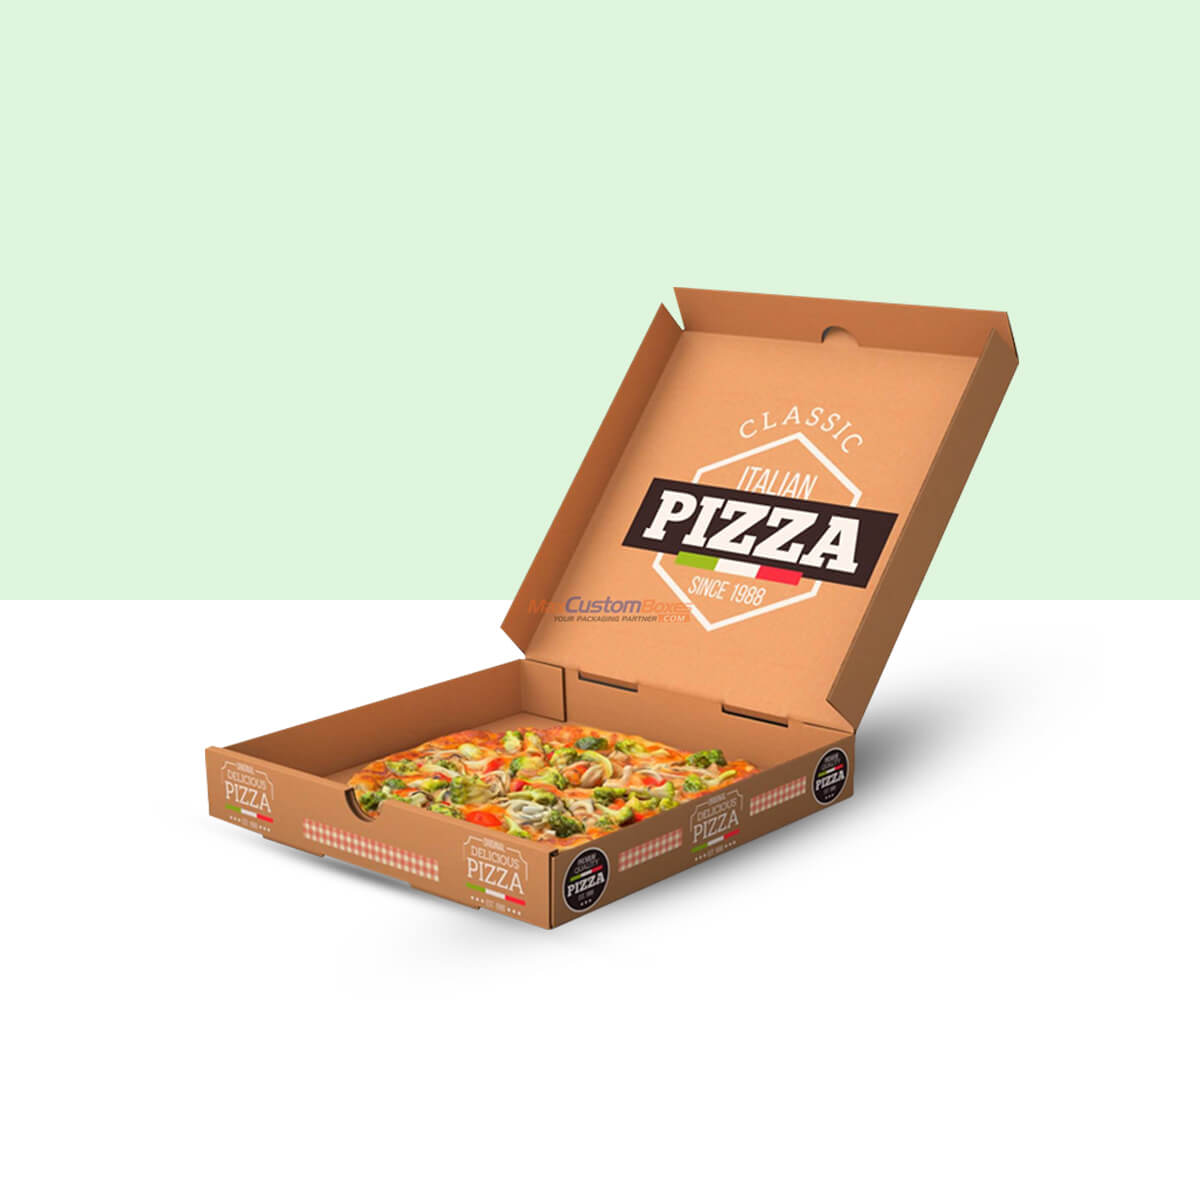  Do pizza box Packaging come in eco-friendly packaging options?